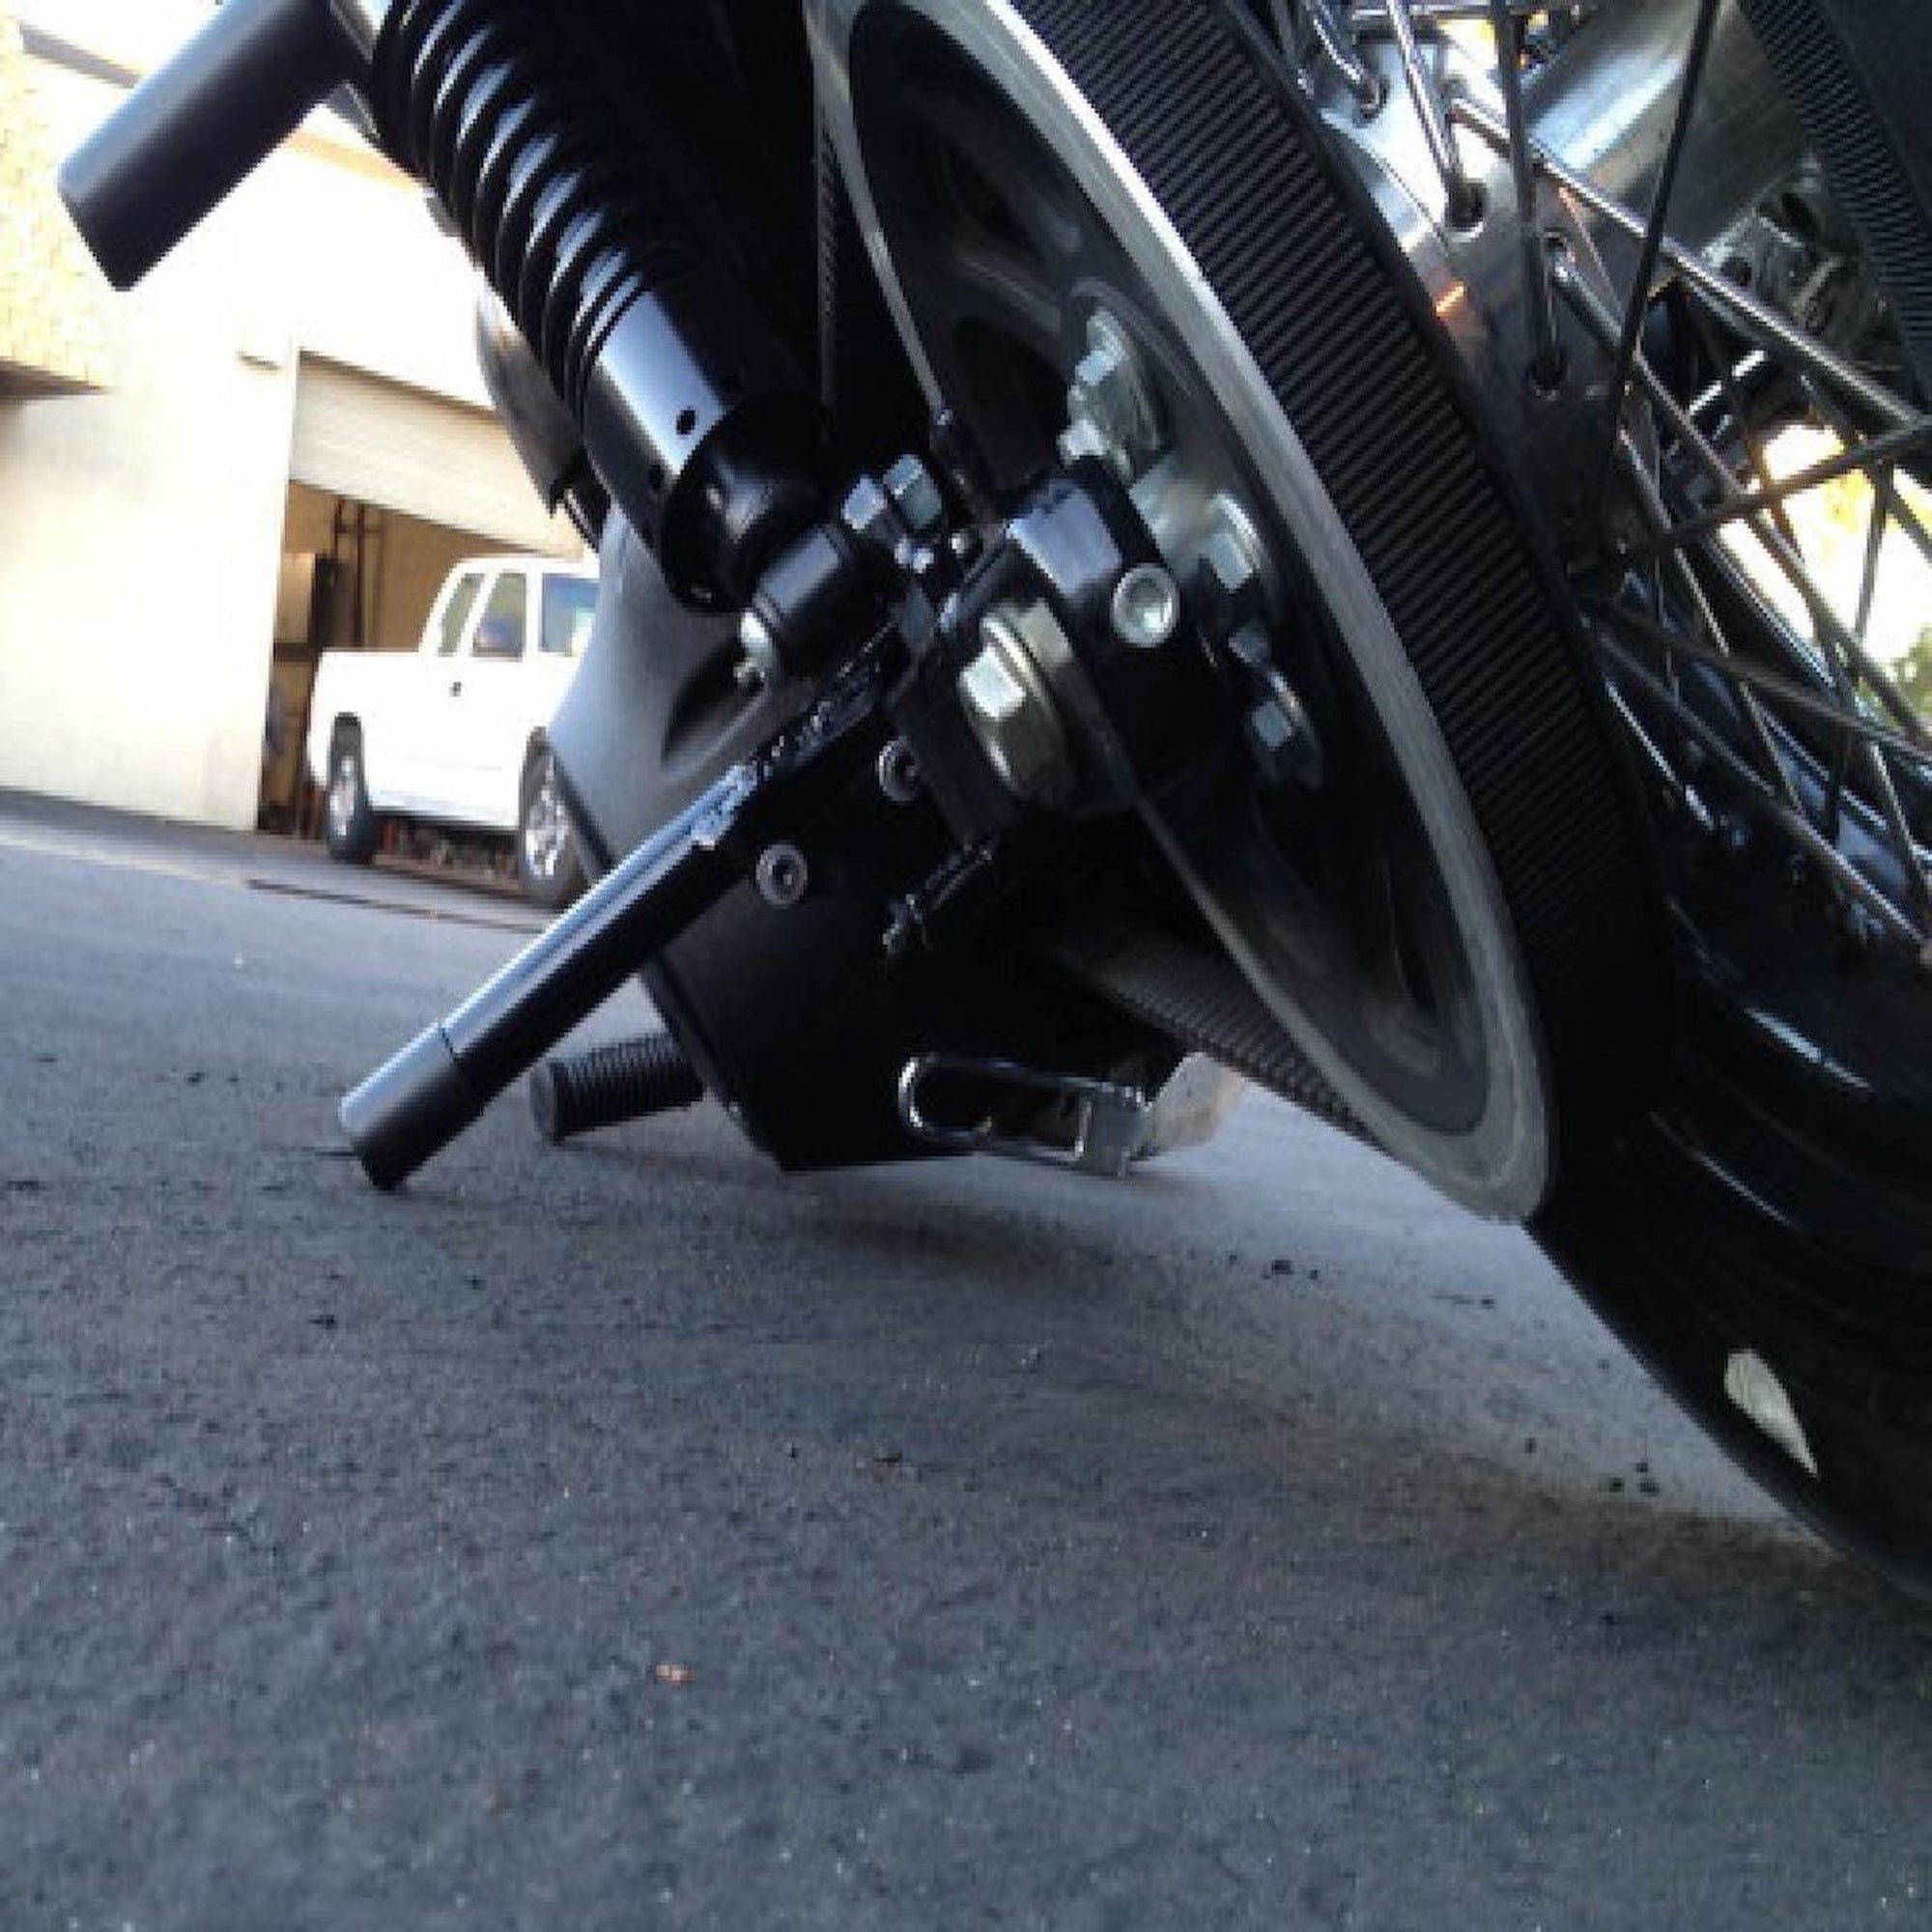 Bung King Highway Peg Crash Bar for Sportster - Rogue Rider Industries